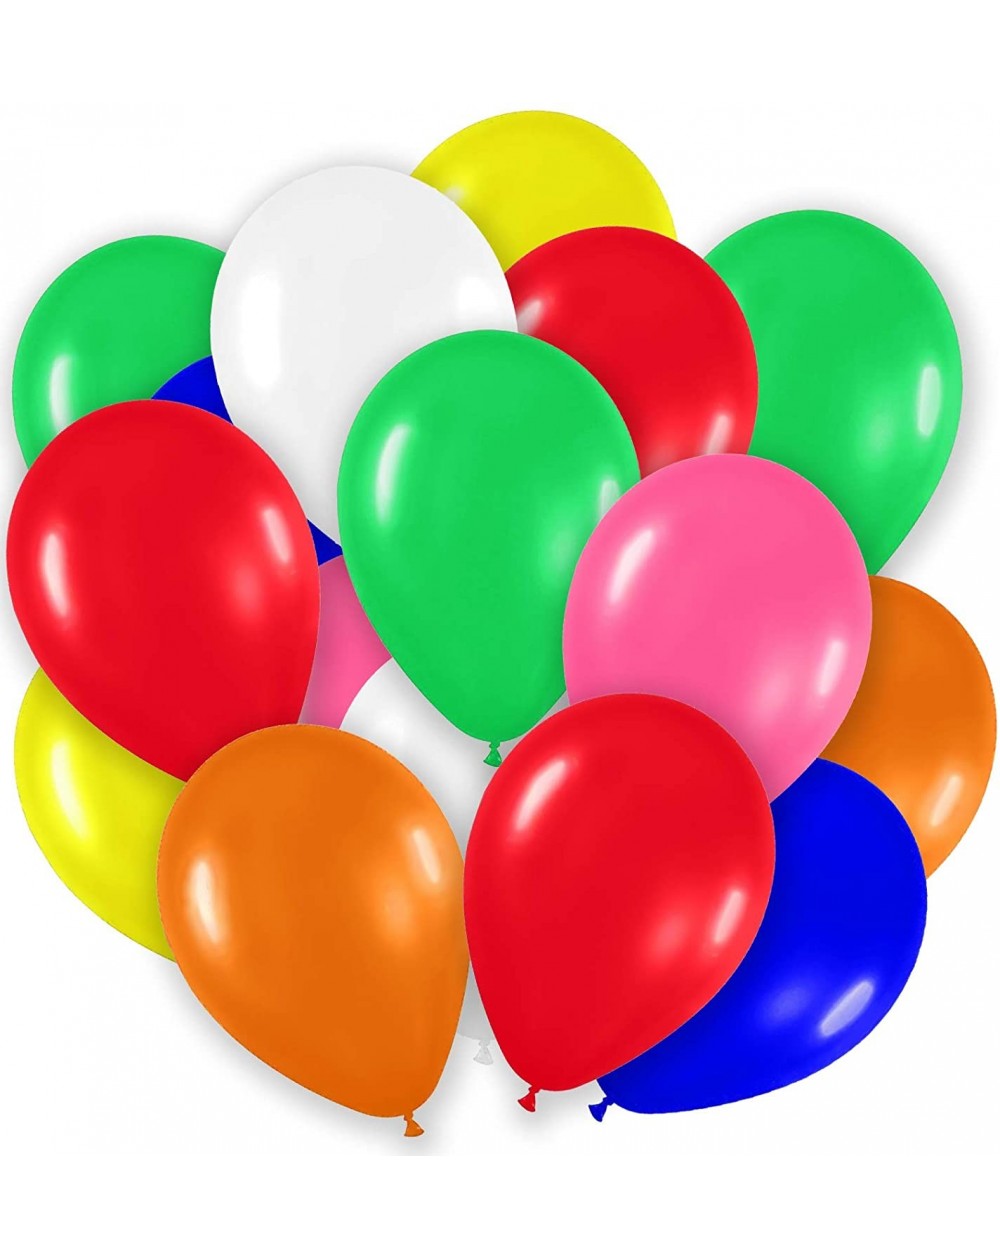 Balloons Pack of 100- Assorted Bright Color 5" Decorator Latex Balloons- MADE IN USA! - Assorted Color - CD12IGC4LYV $7.76